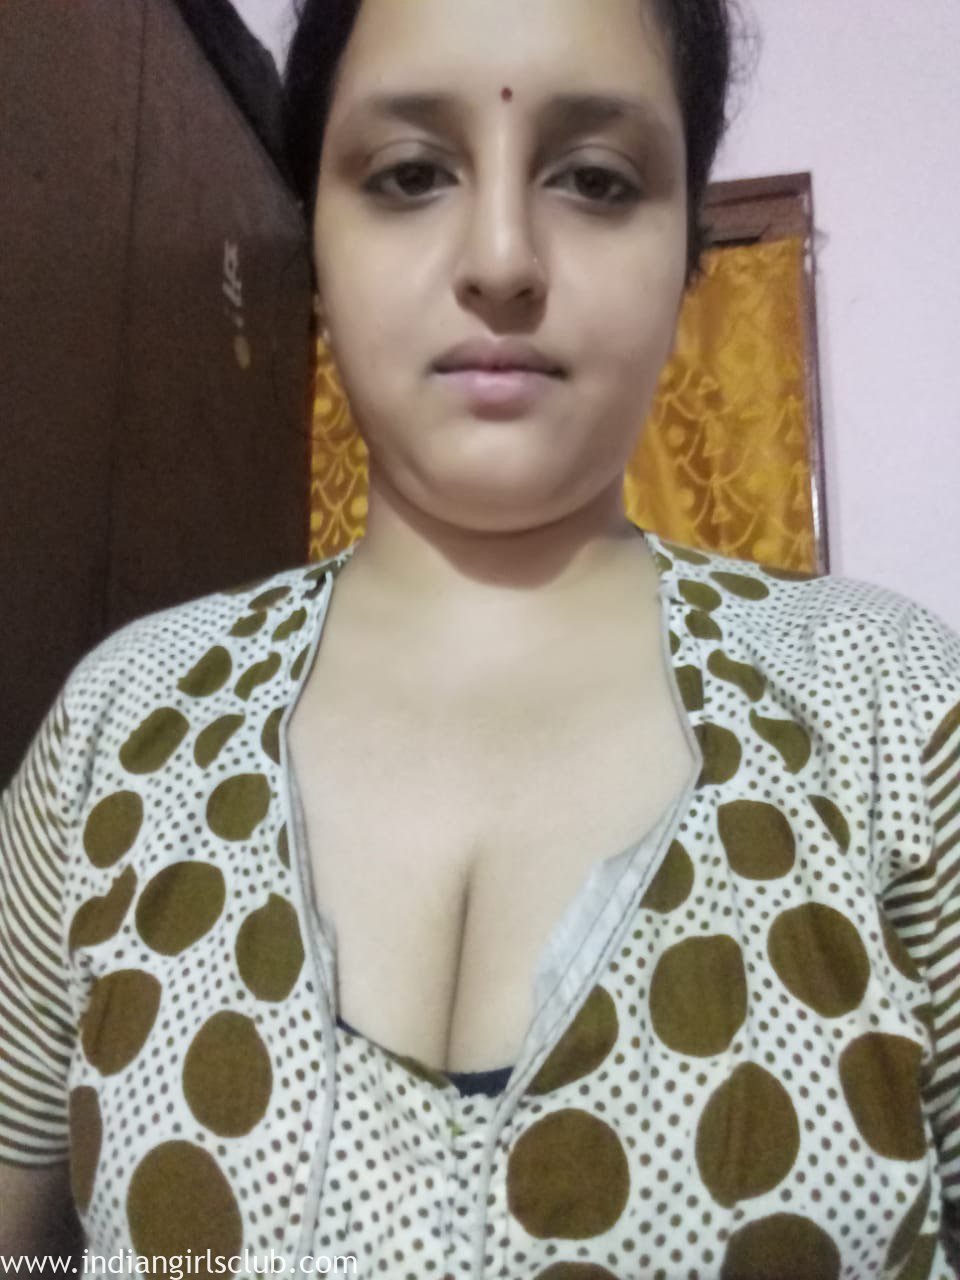 Horny Bengali Indian Housewife Ready For Hot picture